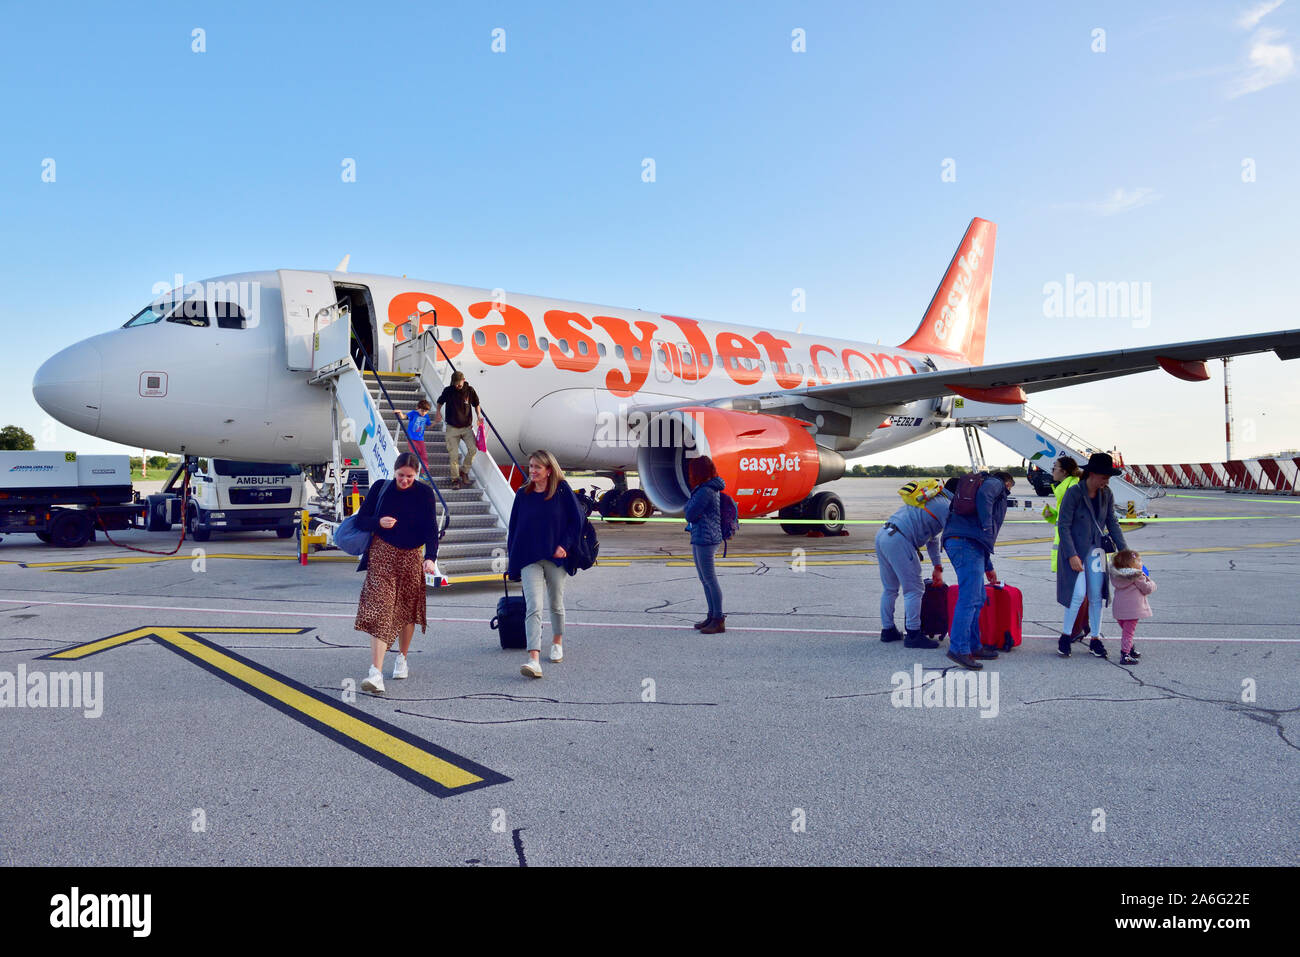 EasyJet plane with passengers disembarking at  airport using steps at front of plane Stock Photo